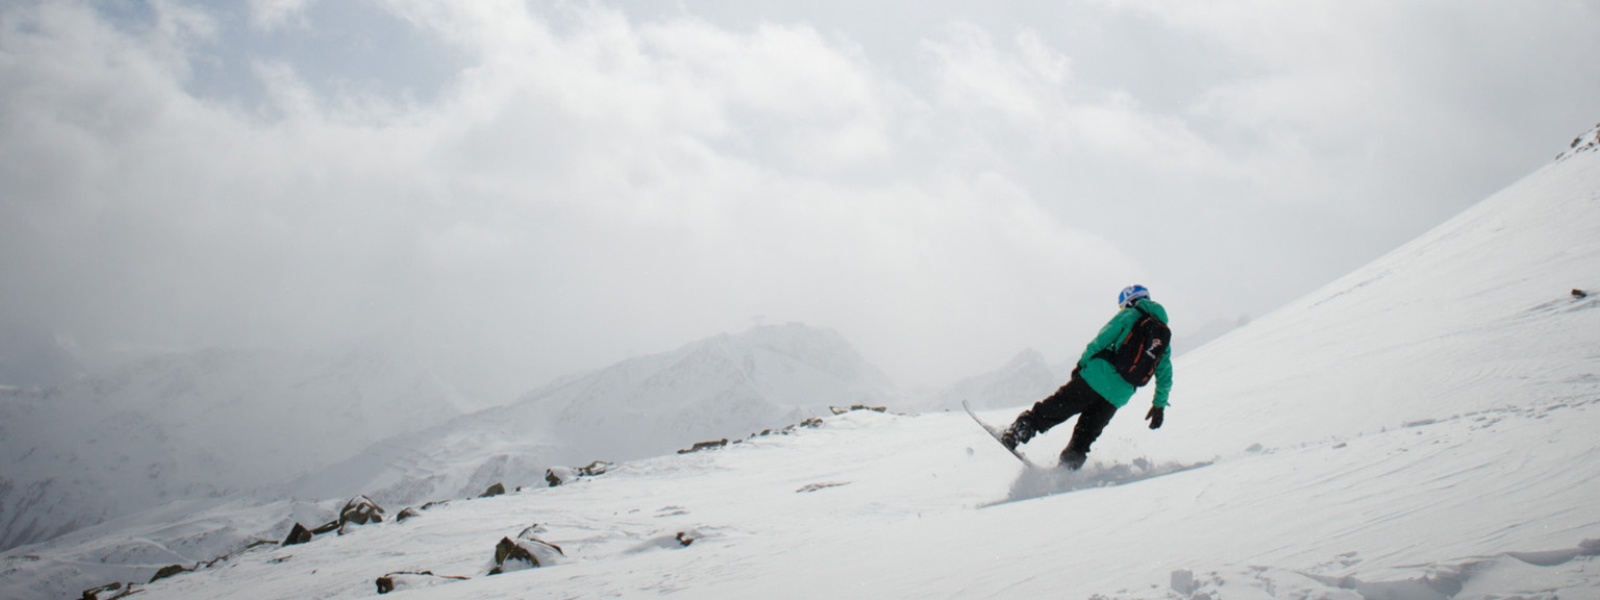 Snowboarders in a green jacket brakes with the rear part of his board in front of a top in the background you can see snowy mountain peaks through the clouds